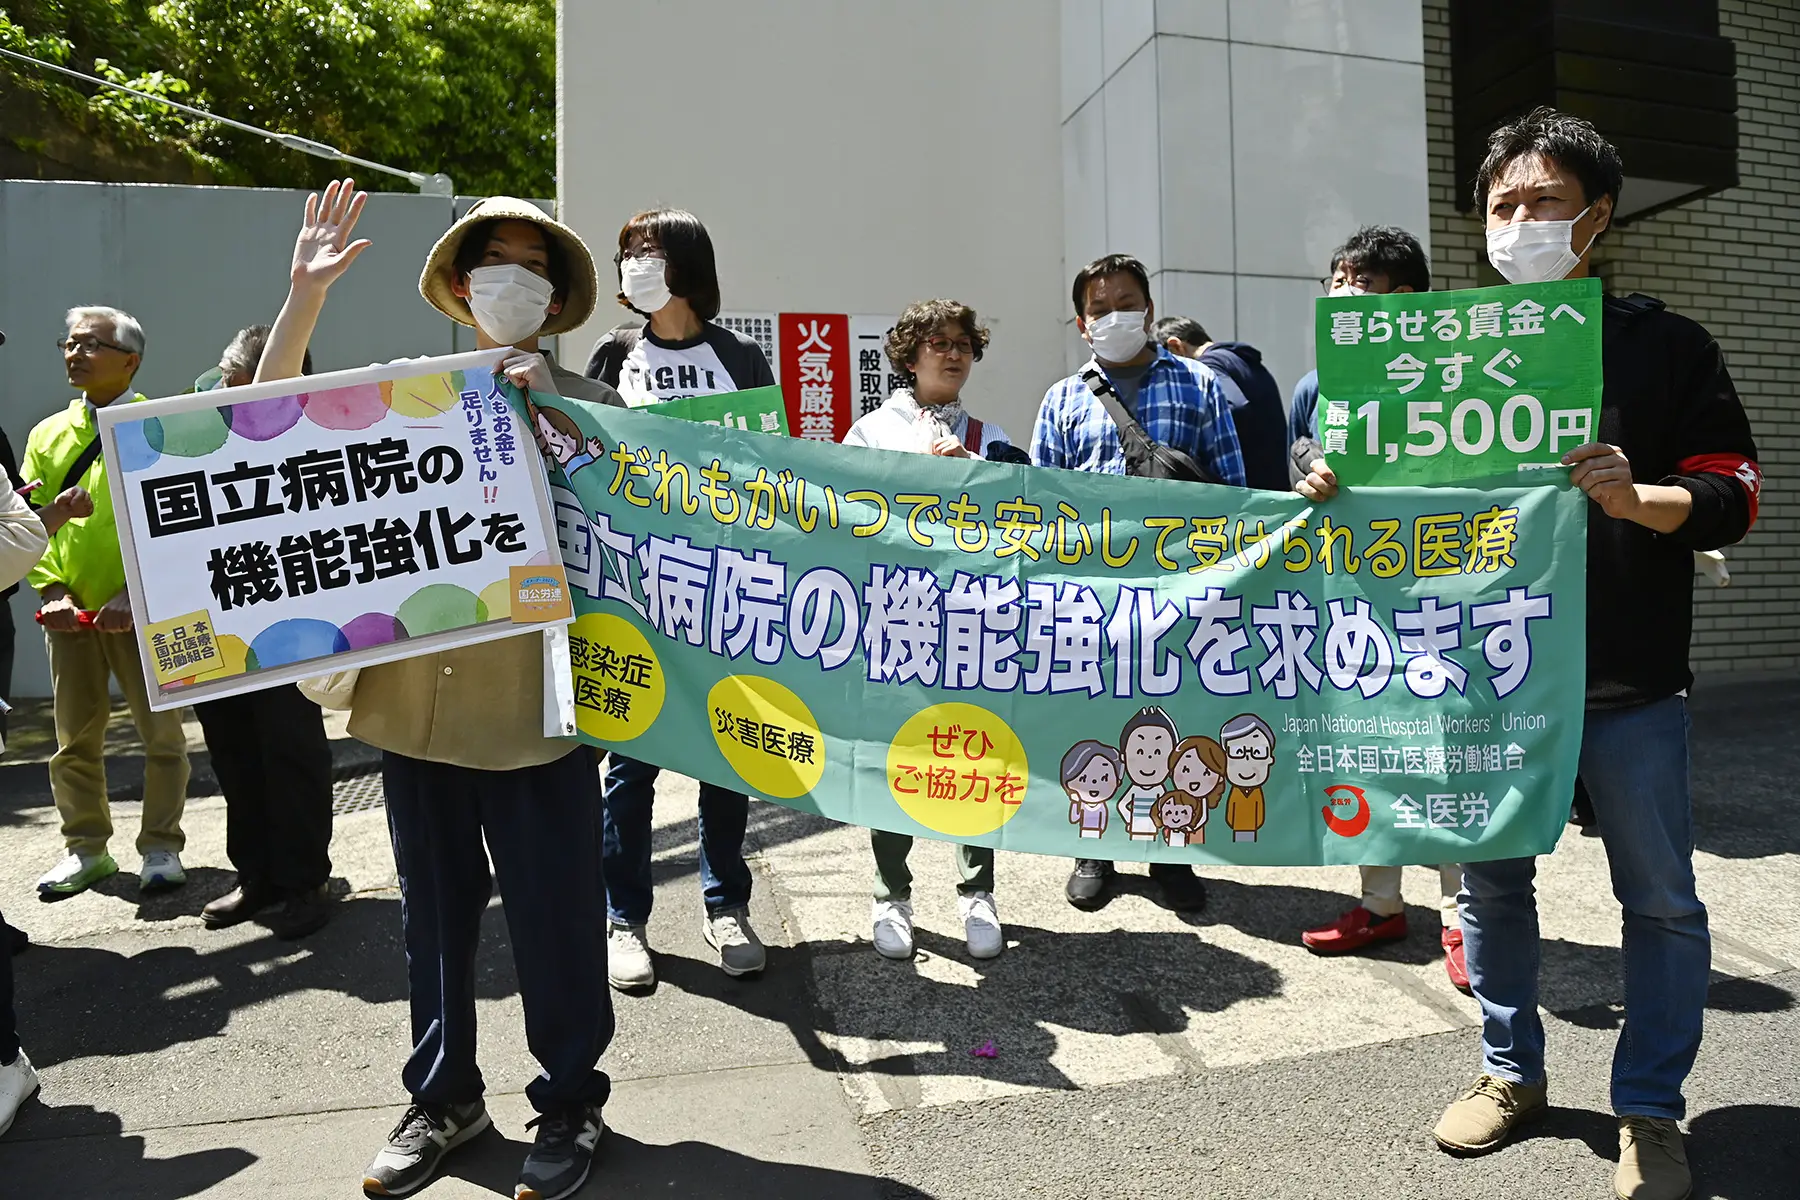 Workers protesting, holding a banner and signs in Japanese